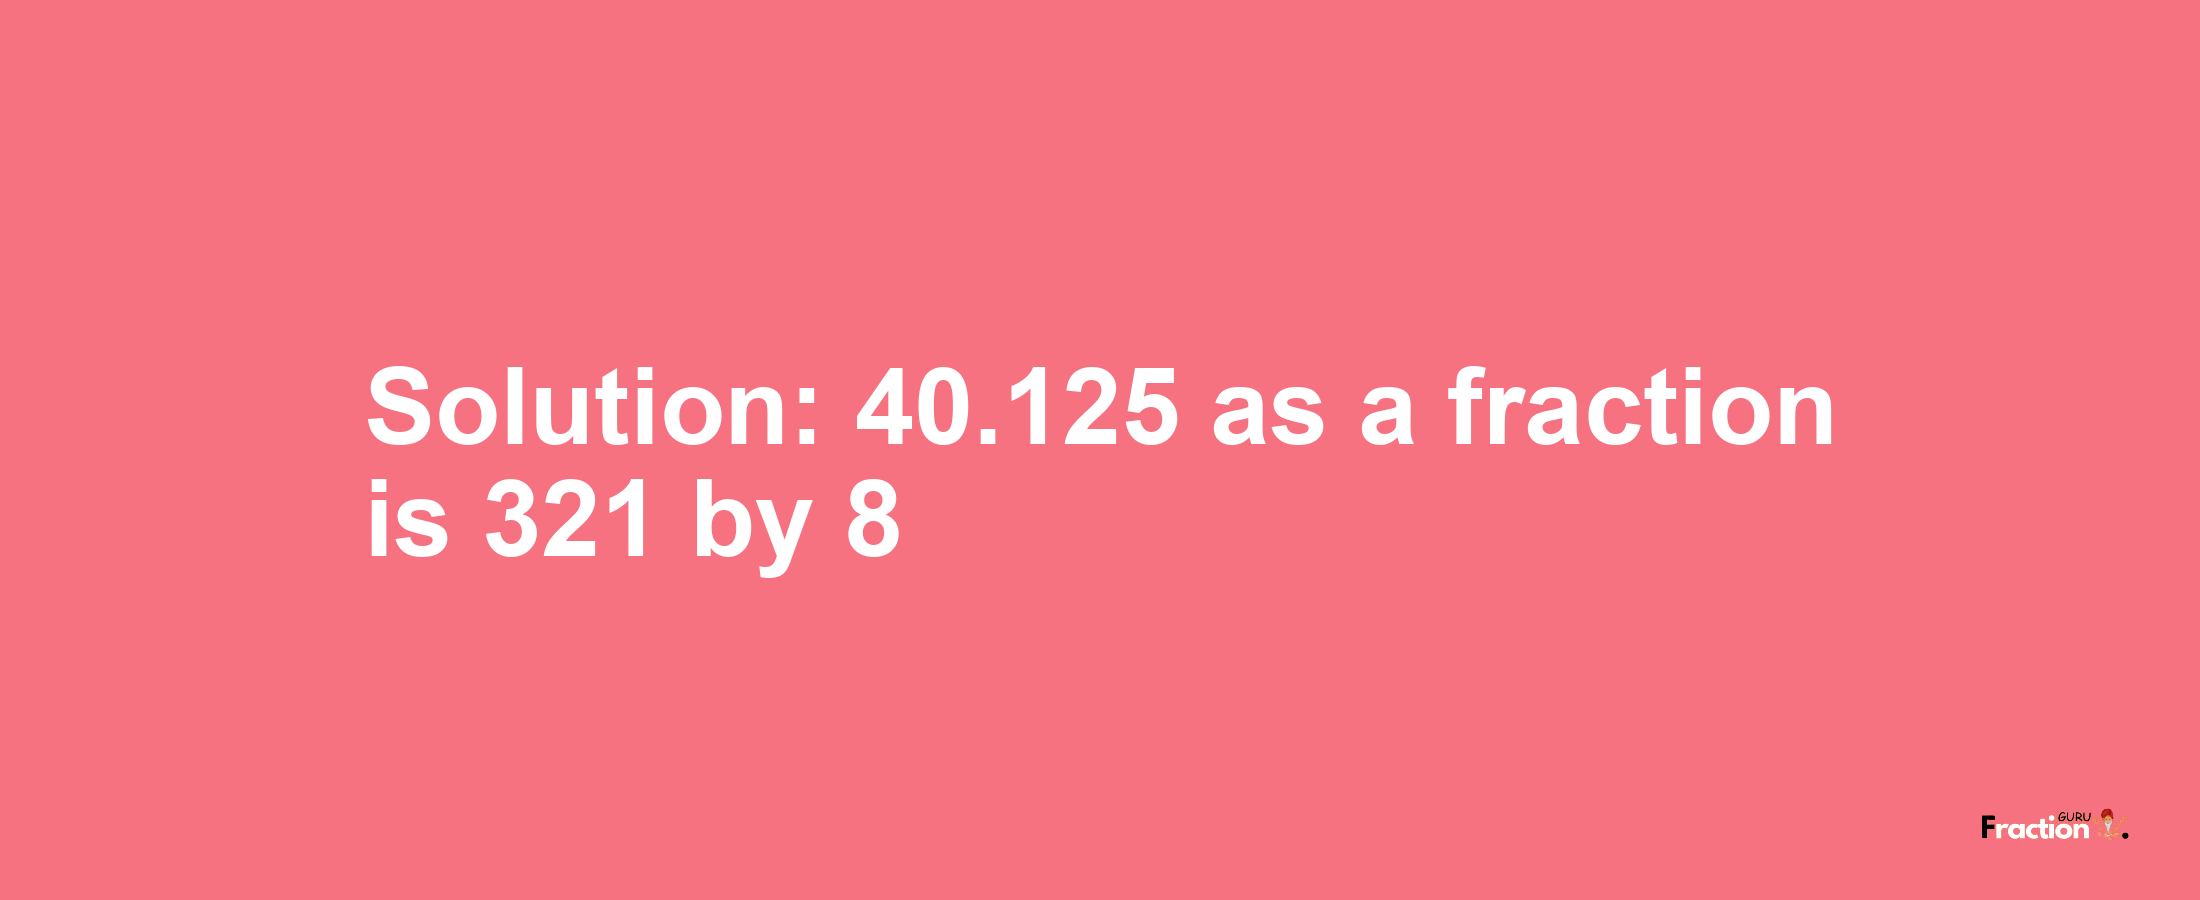 Solution:40.125 as a fraction is 321/8